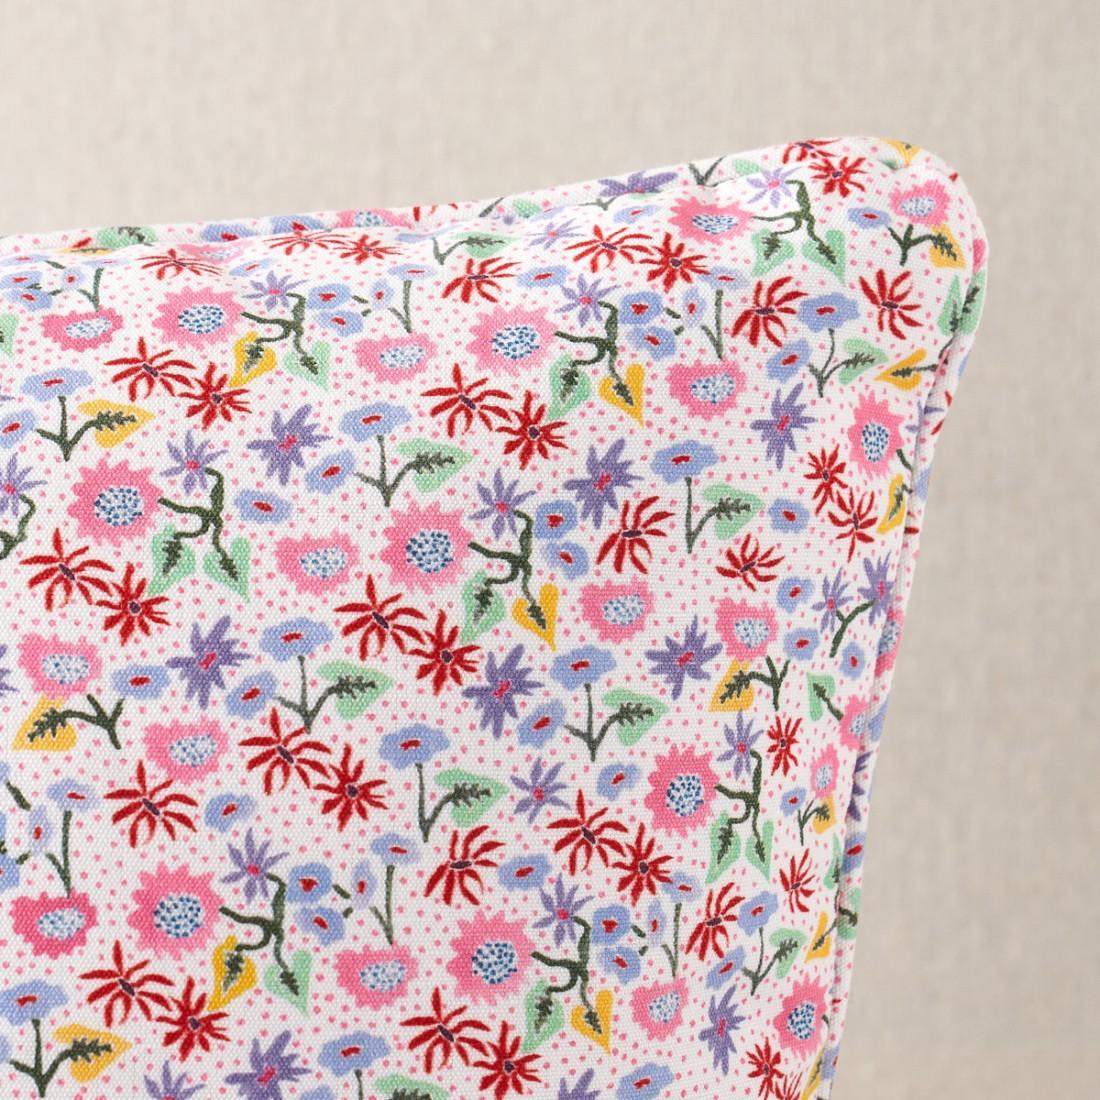 This pillow features Calico by Happy Menocal for Schumacher with a self-welt finish. Happy Menocal’s multicolor microfloral fabric offers a fresh take on a traditional calico. With its charming, stylized flowers scattered against a stippled